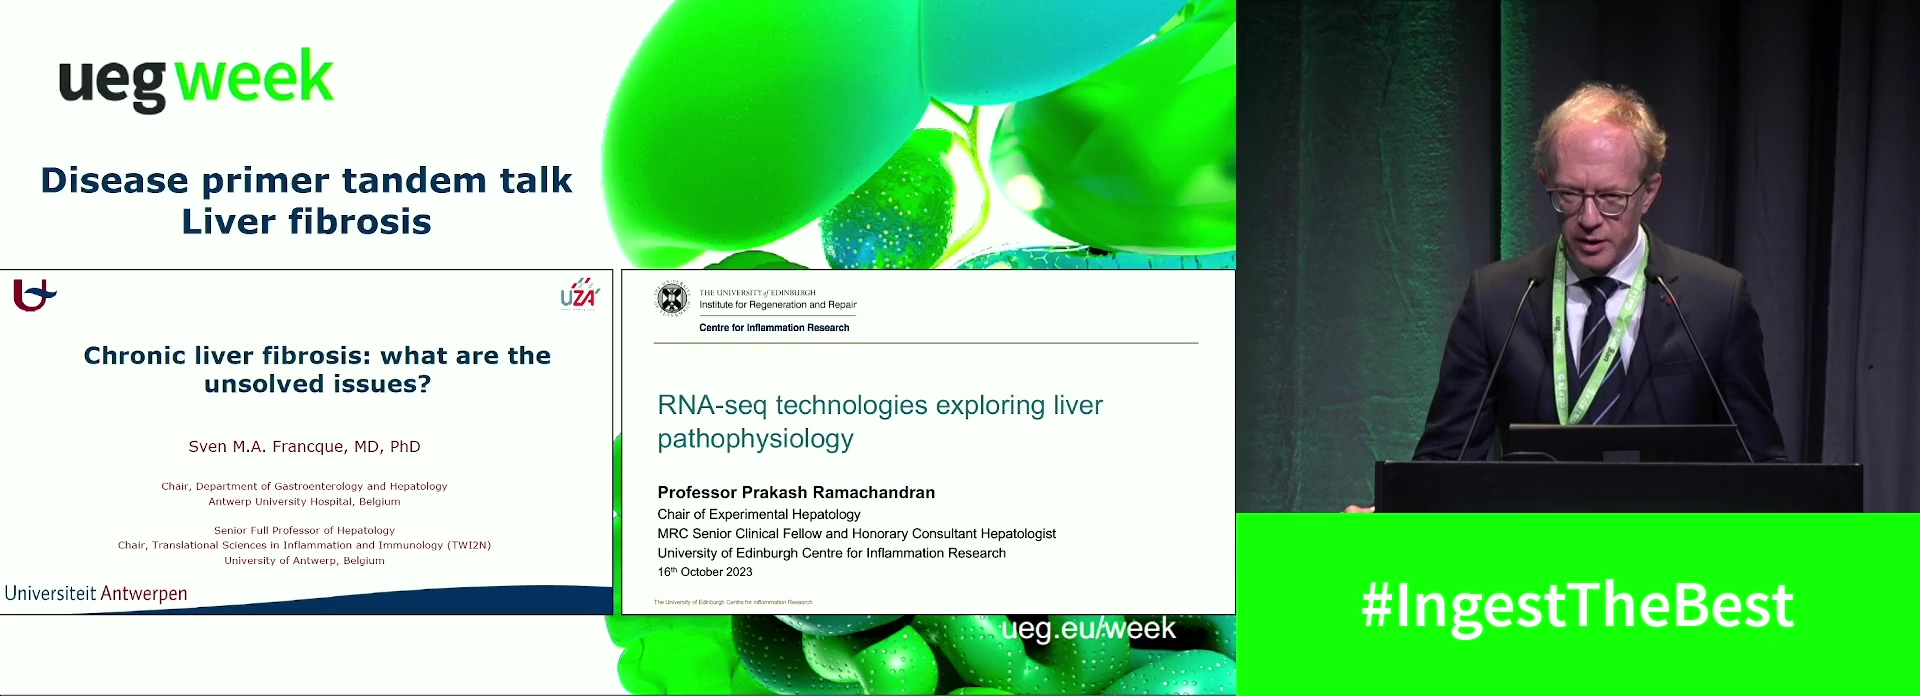 What are the unsolved questions in chronic liver fibrosis and RNA-seq technologies exploring liver pathophysiology